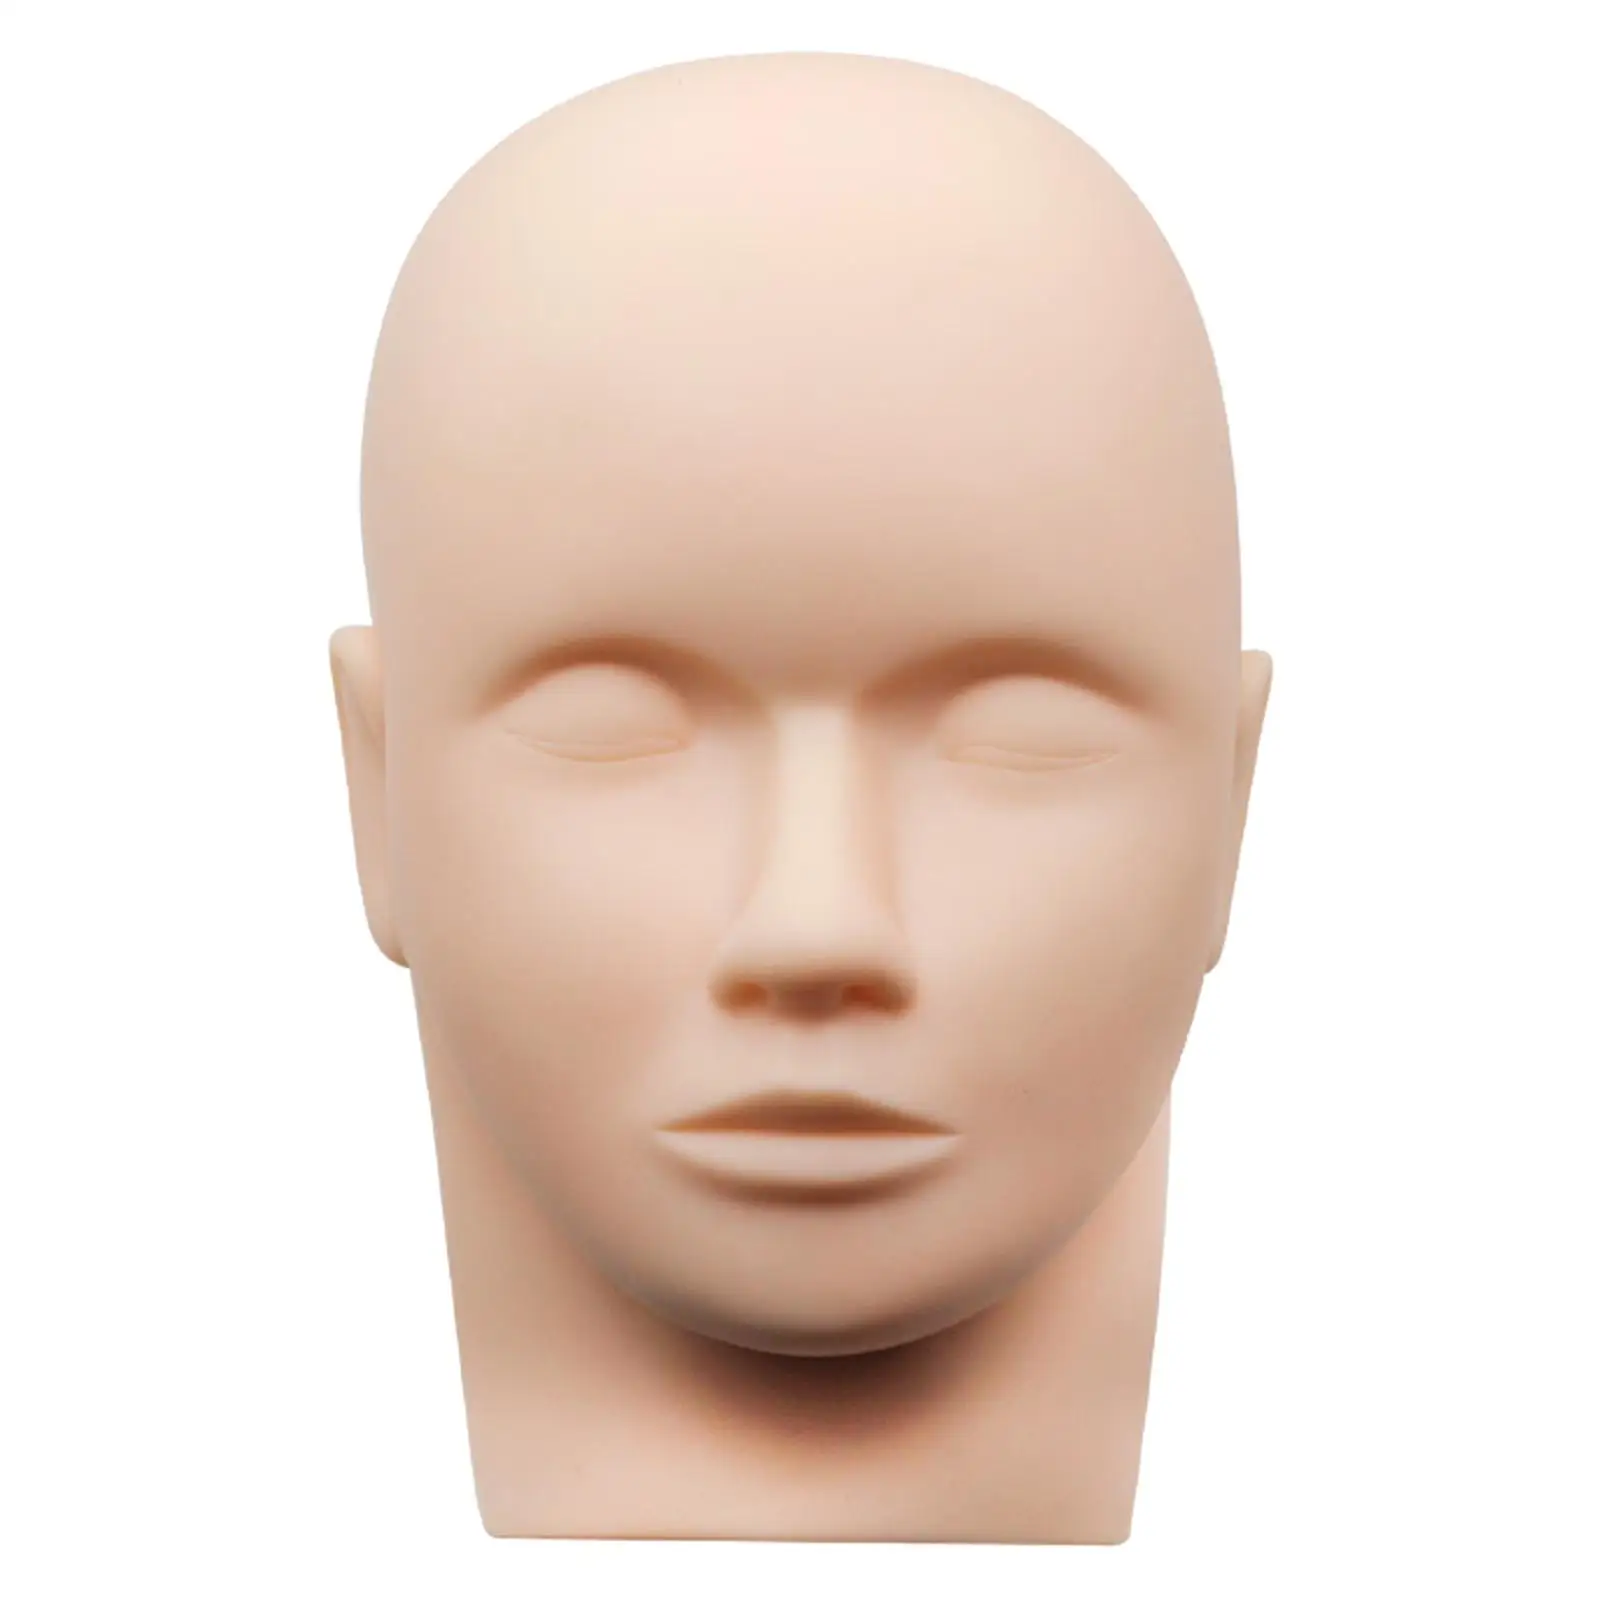 Eyelash Silicone Head Mold Soft Touch Lash Extension Supplies Practice Head Mannequin Cosmetology Make up Training